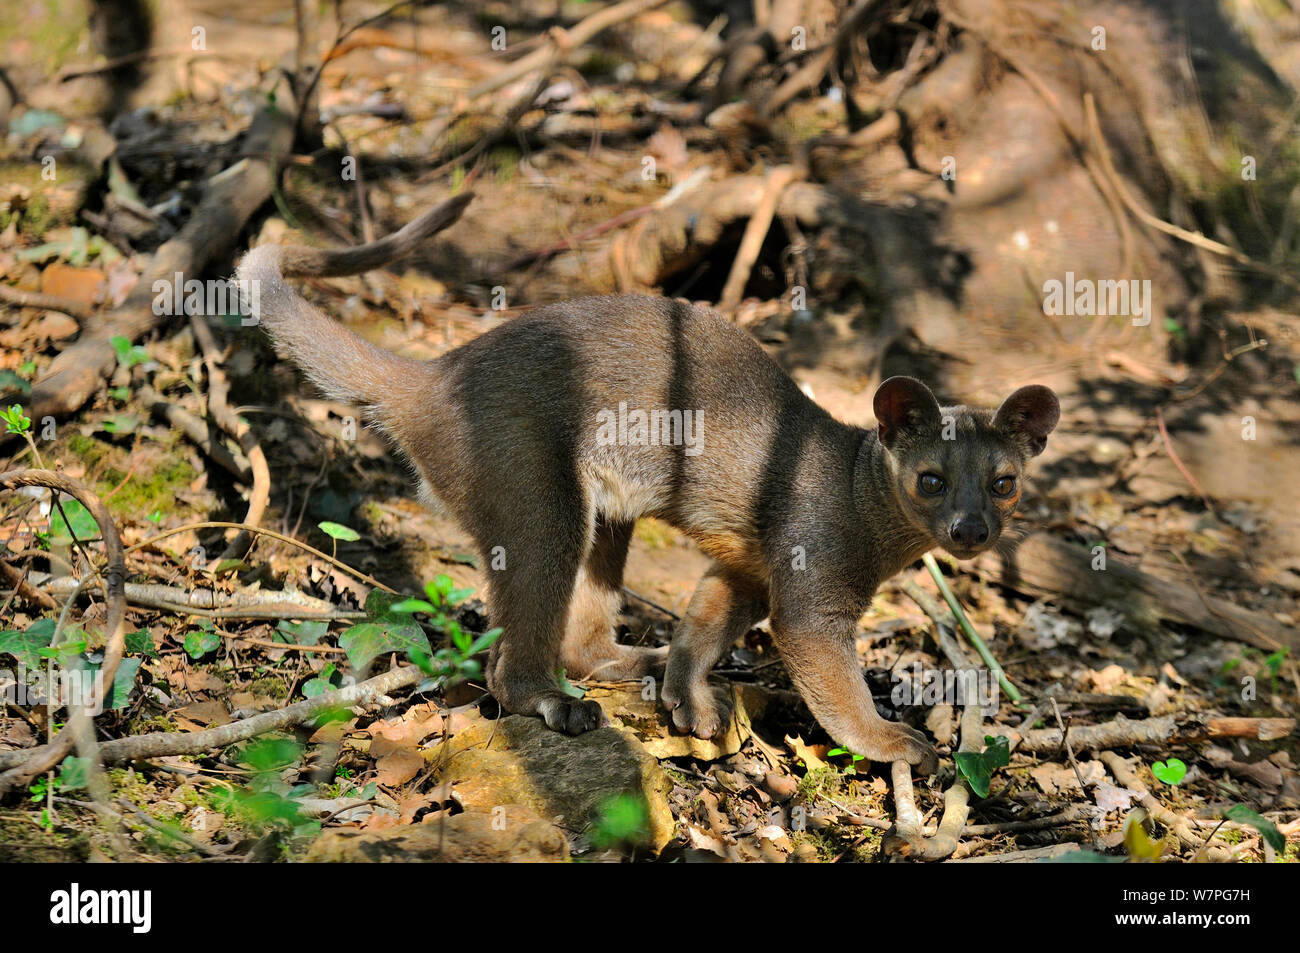 Young fossa (Cryptoprocta ferox) captive from  Madagascar, Vulnerable species Stock Photo